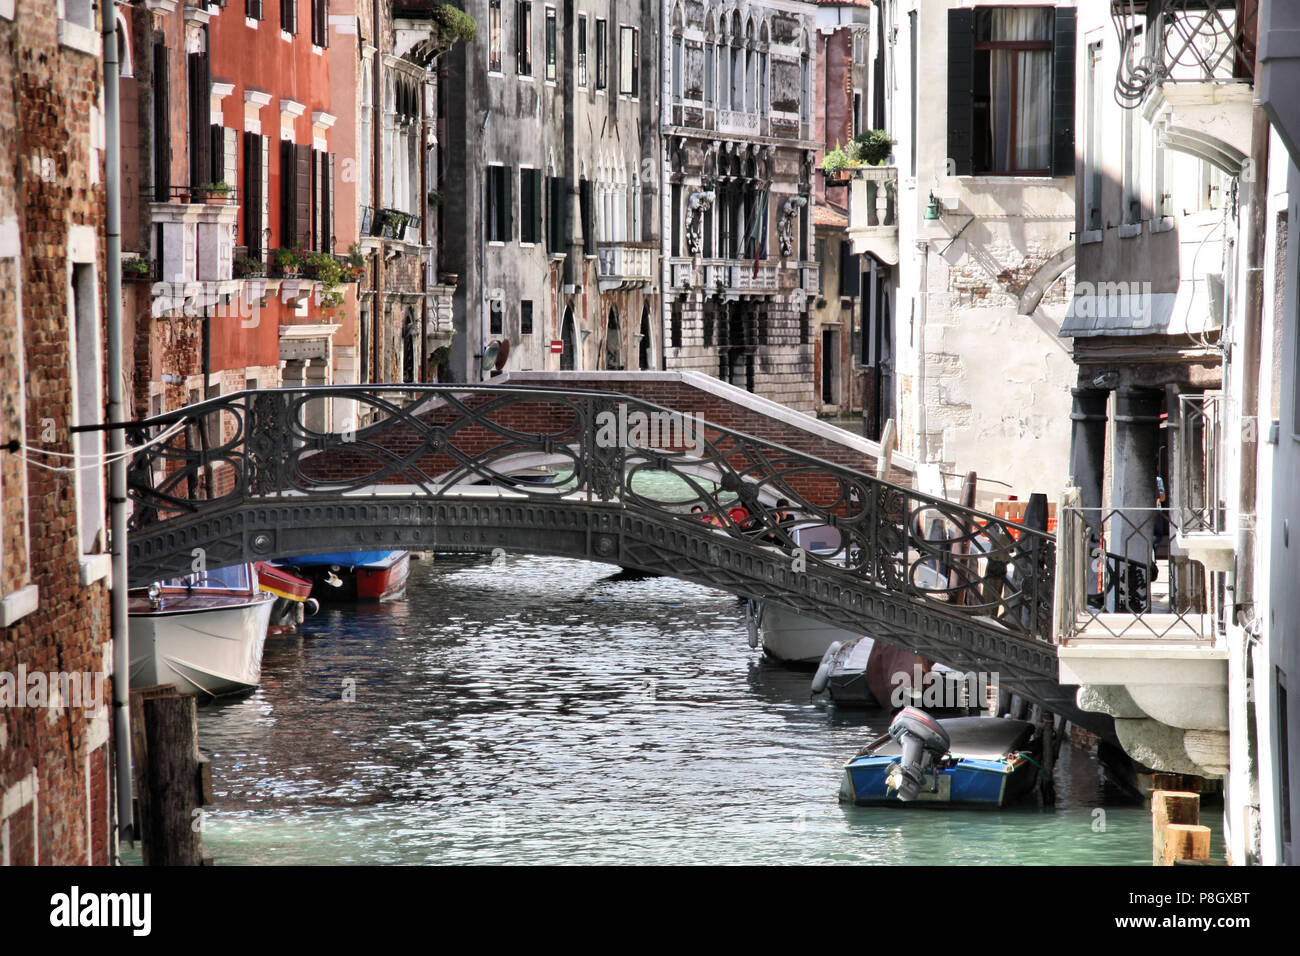 Venice, Italy - boats and old architecture with typical water canal Stock Photo